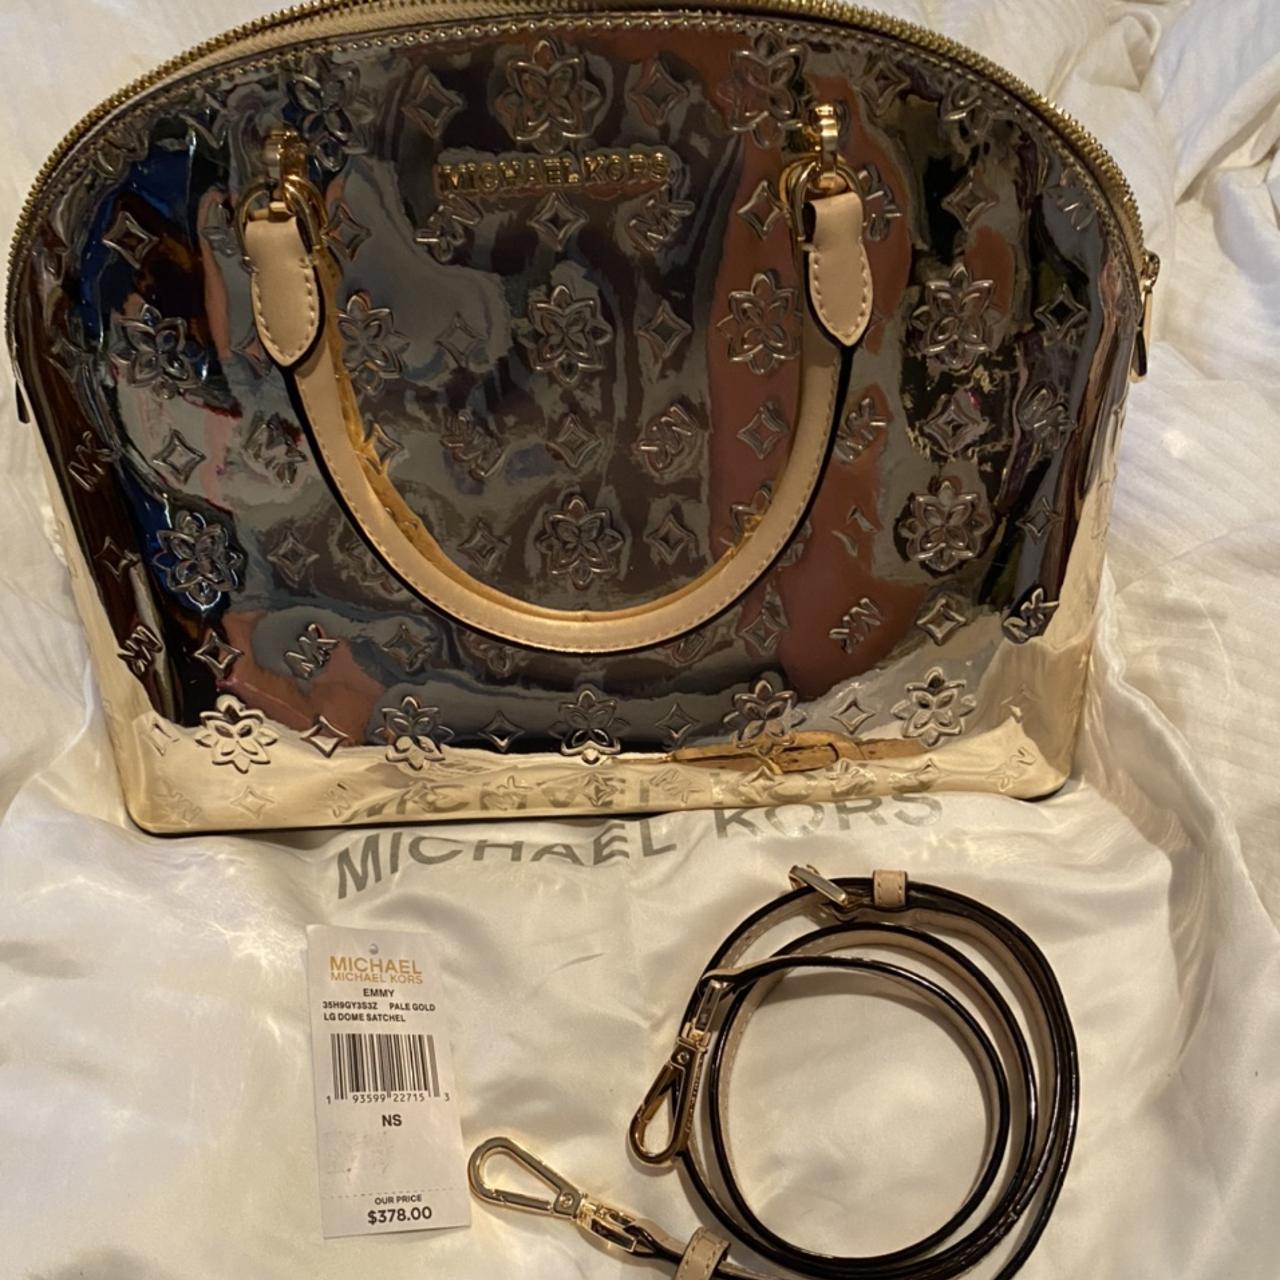 Michael Kors 'Emmy' Pale Gold Leather Dome Satchel, Brand New